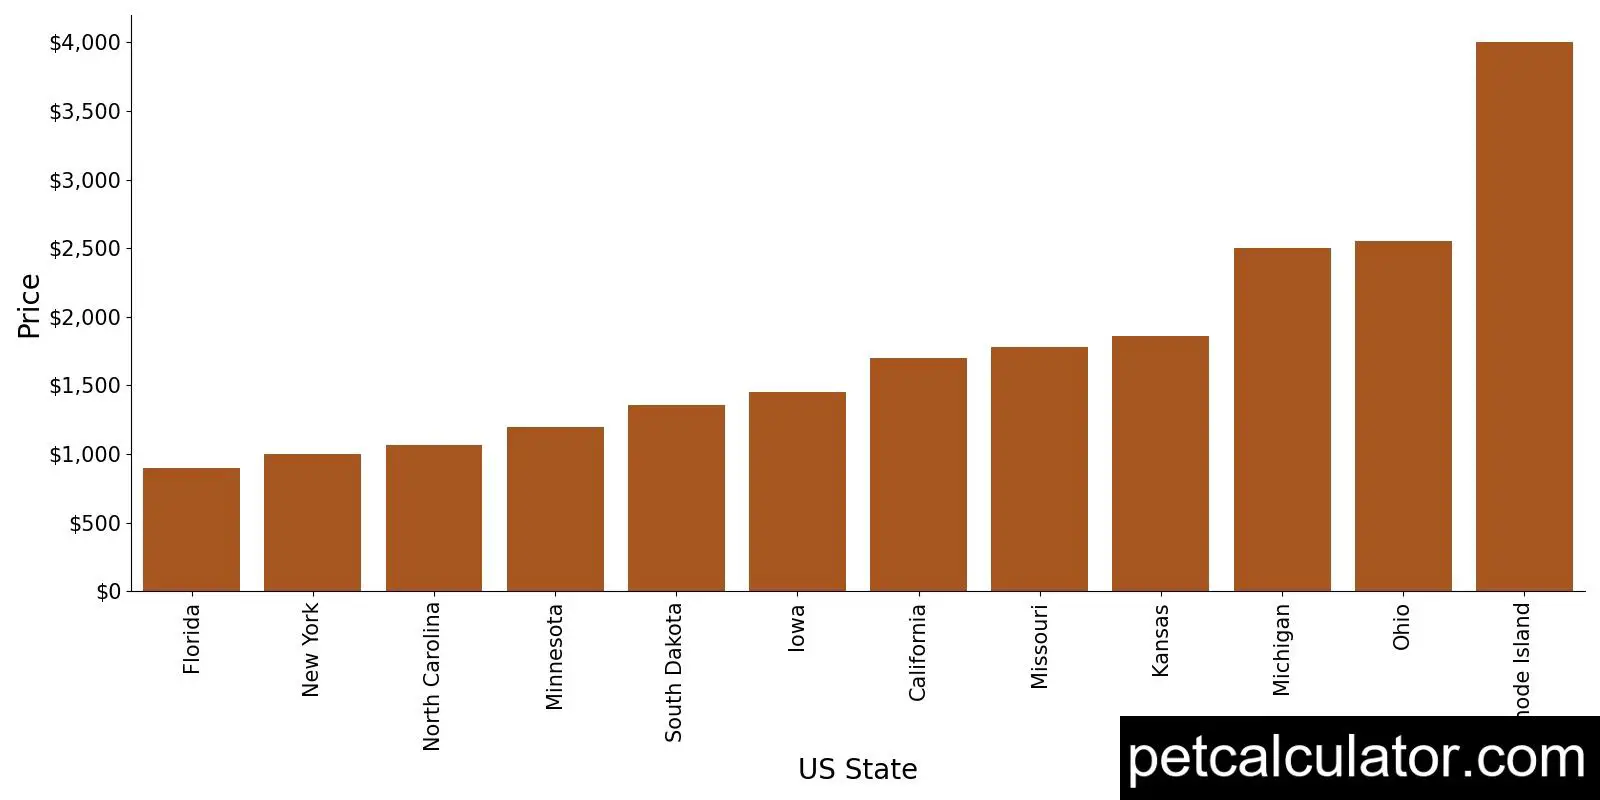 Price of Silky Terrier by US State 